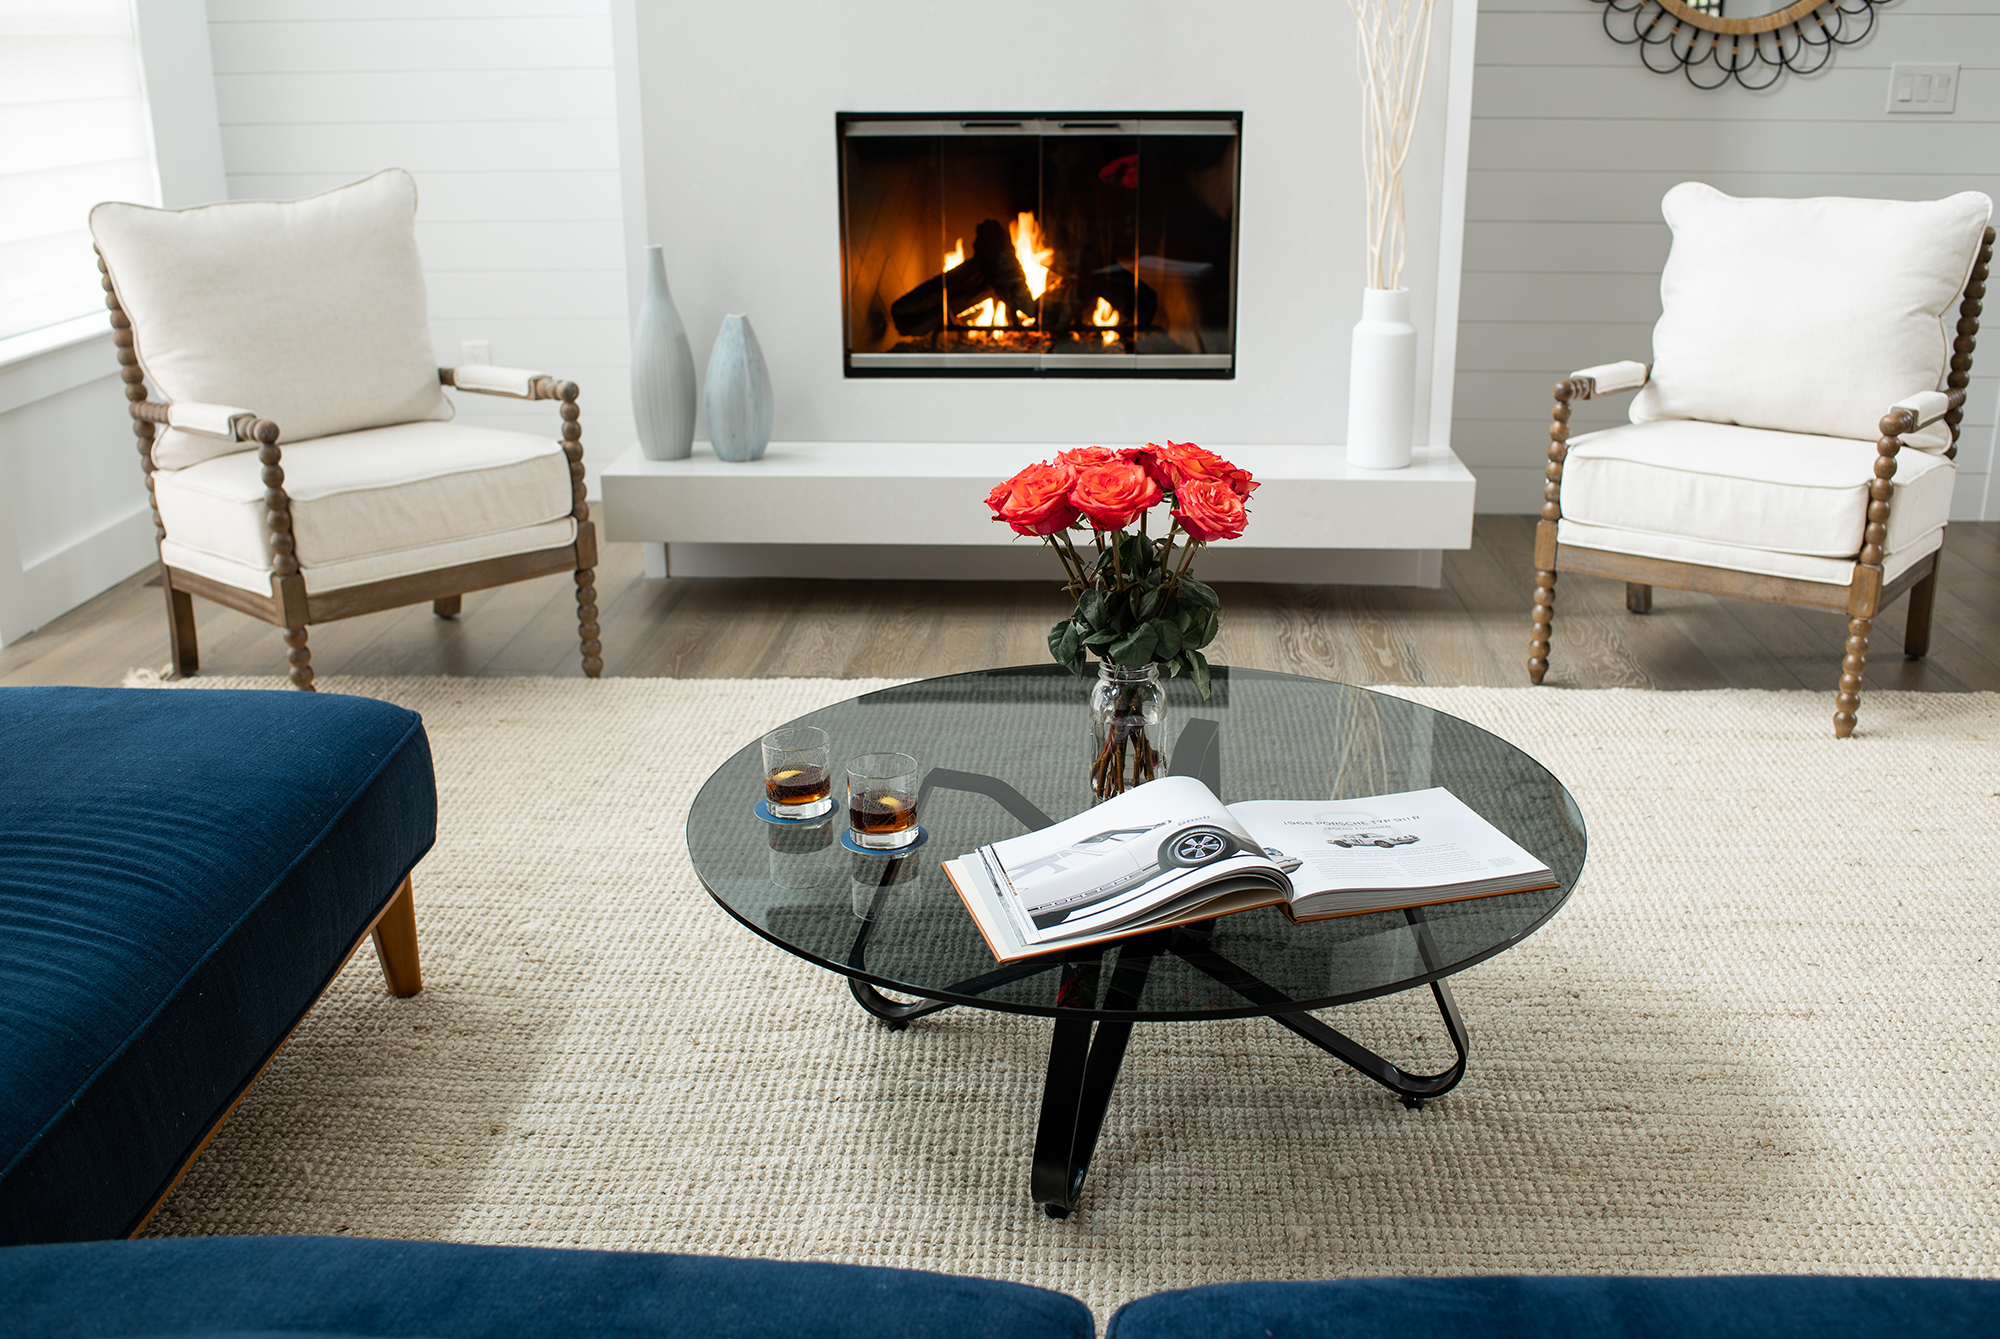 Round grey glass table top with navy blue couch on one side and lit fireplace on the other side